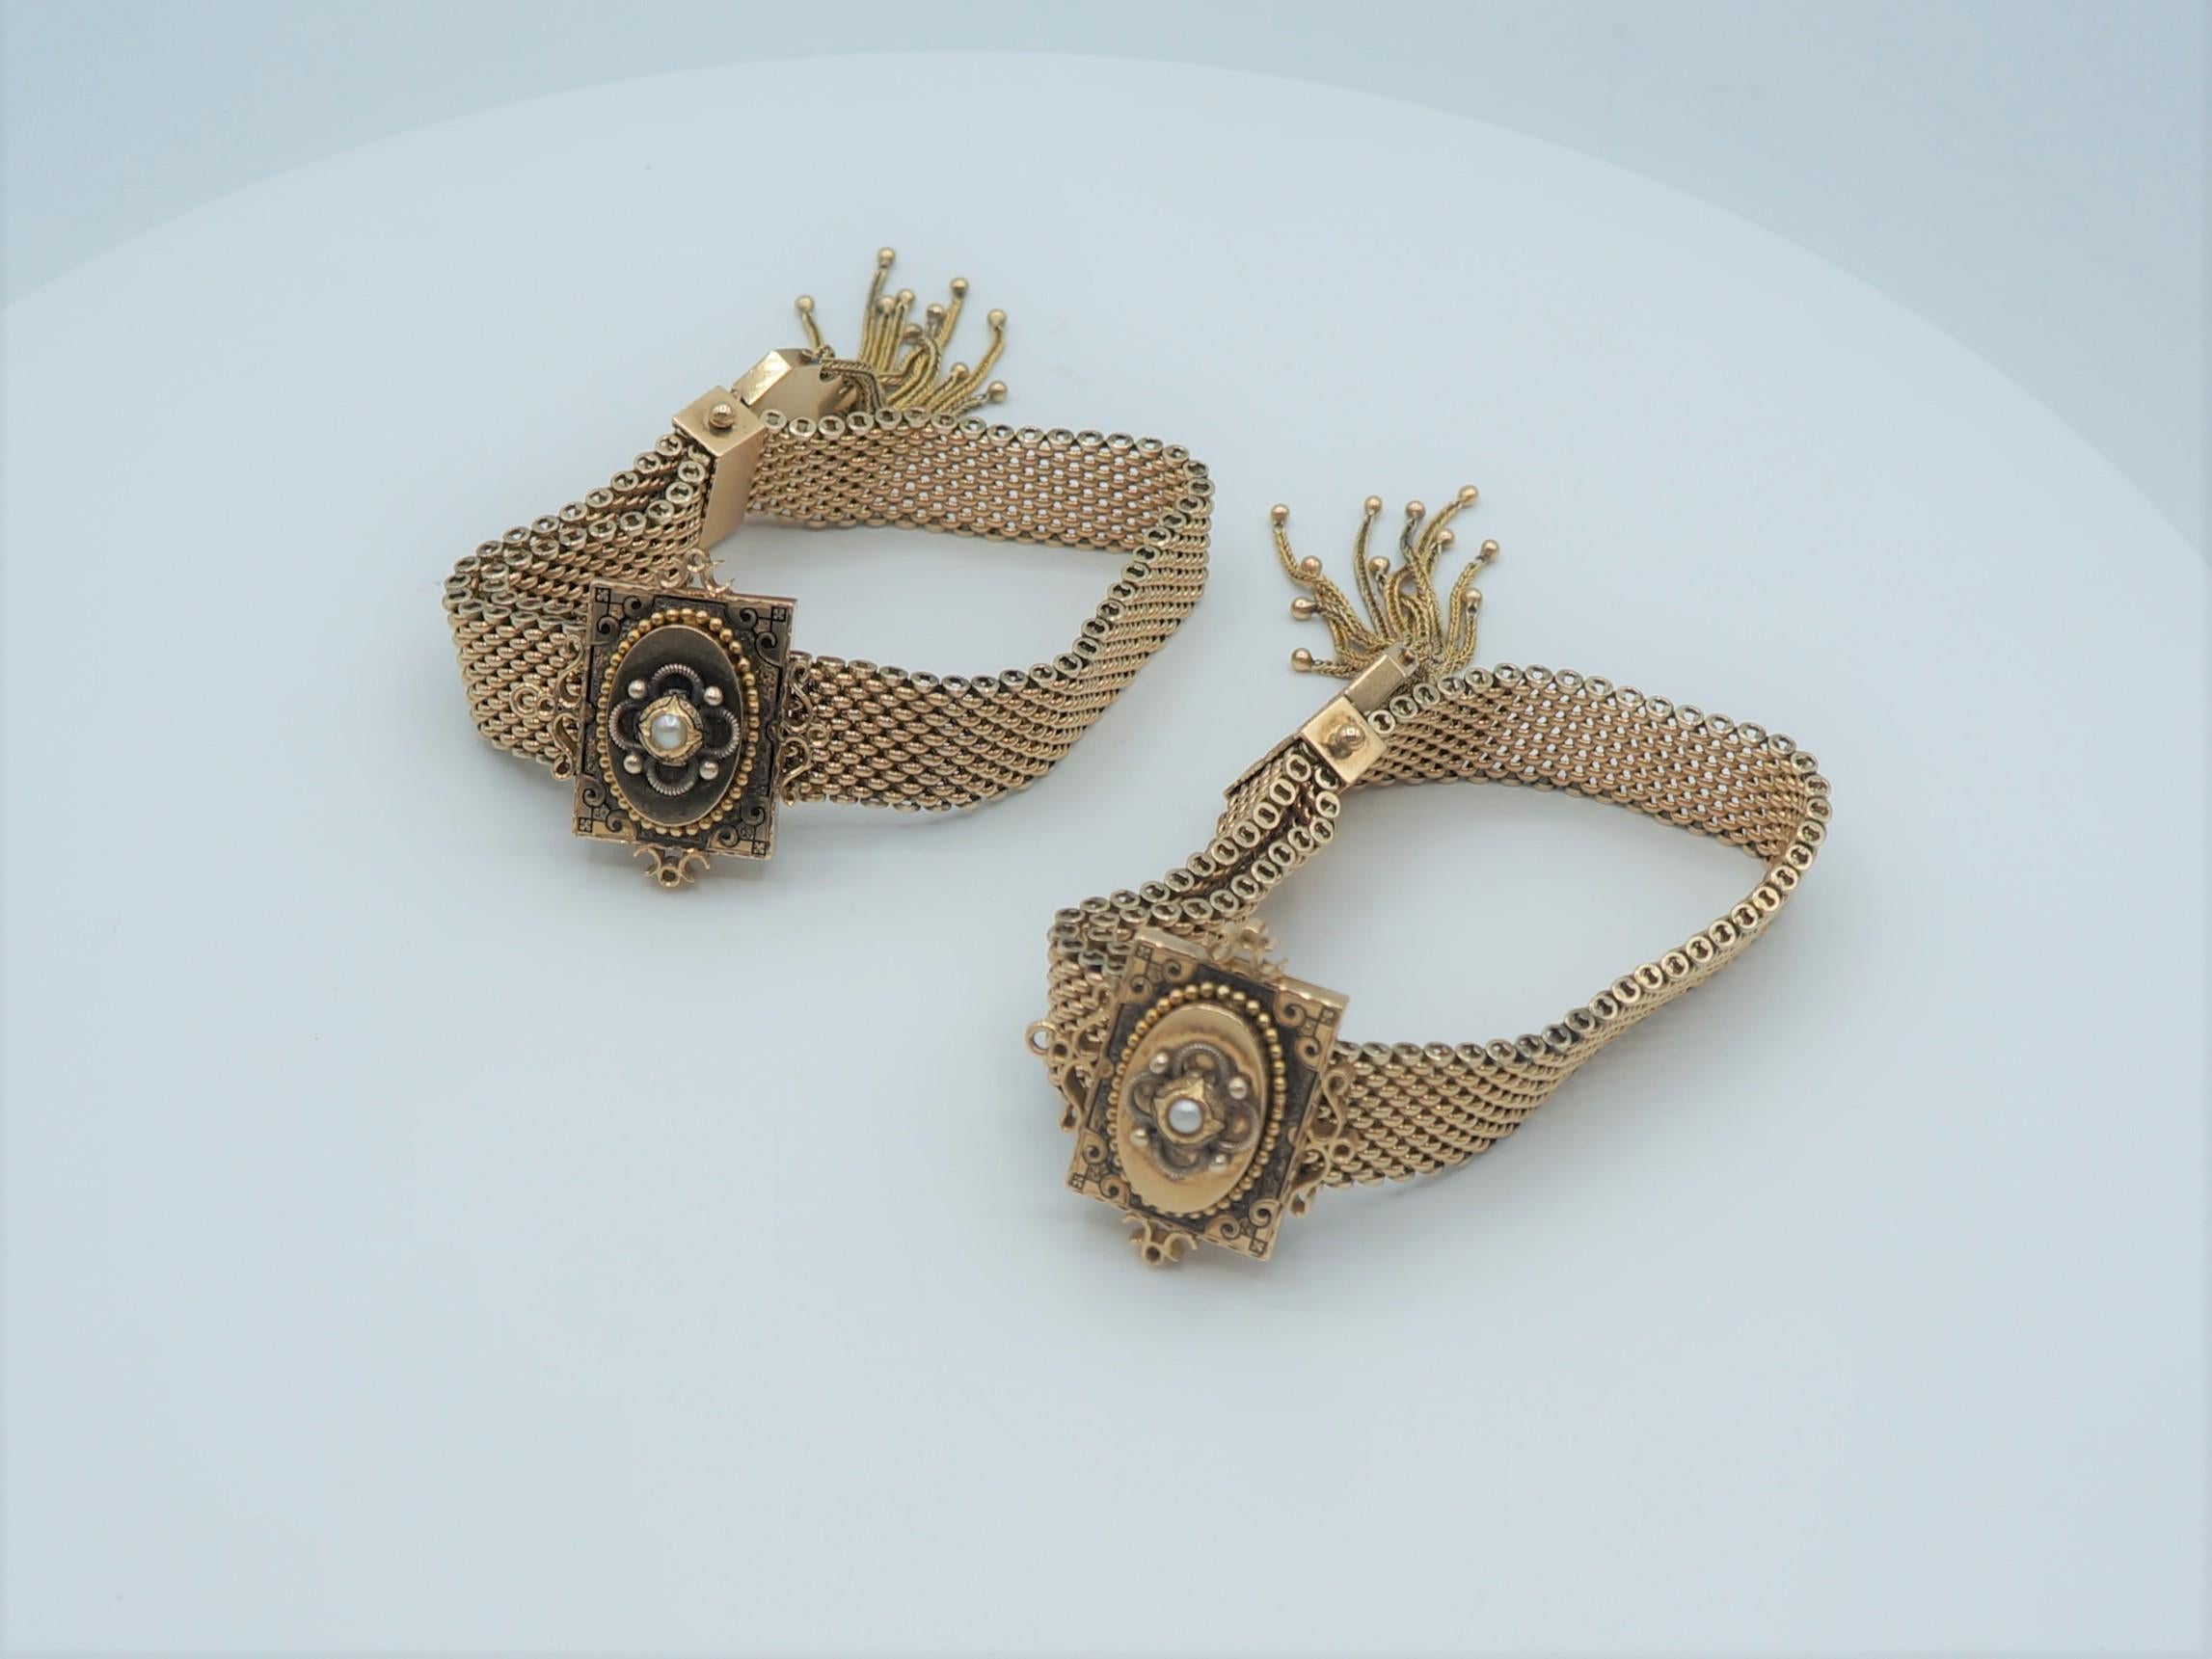 These stunning adjustable Victorian slider bracelets are solid 14k gold. 

The ends of the bracelets feature beautiful tassels which are connected to the 